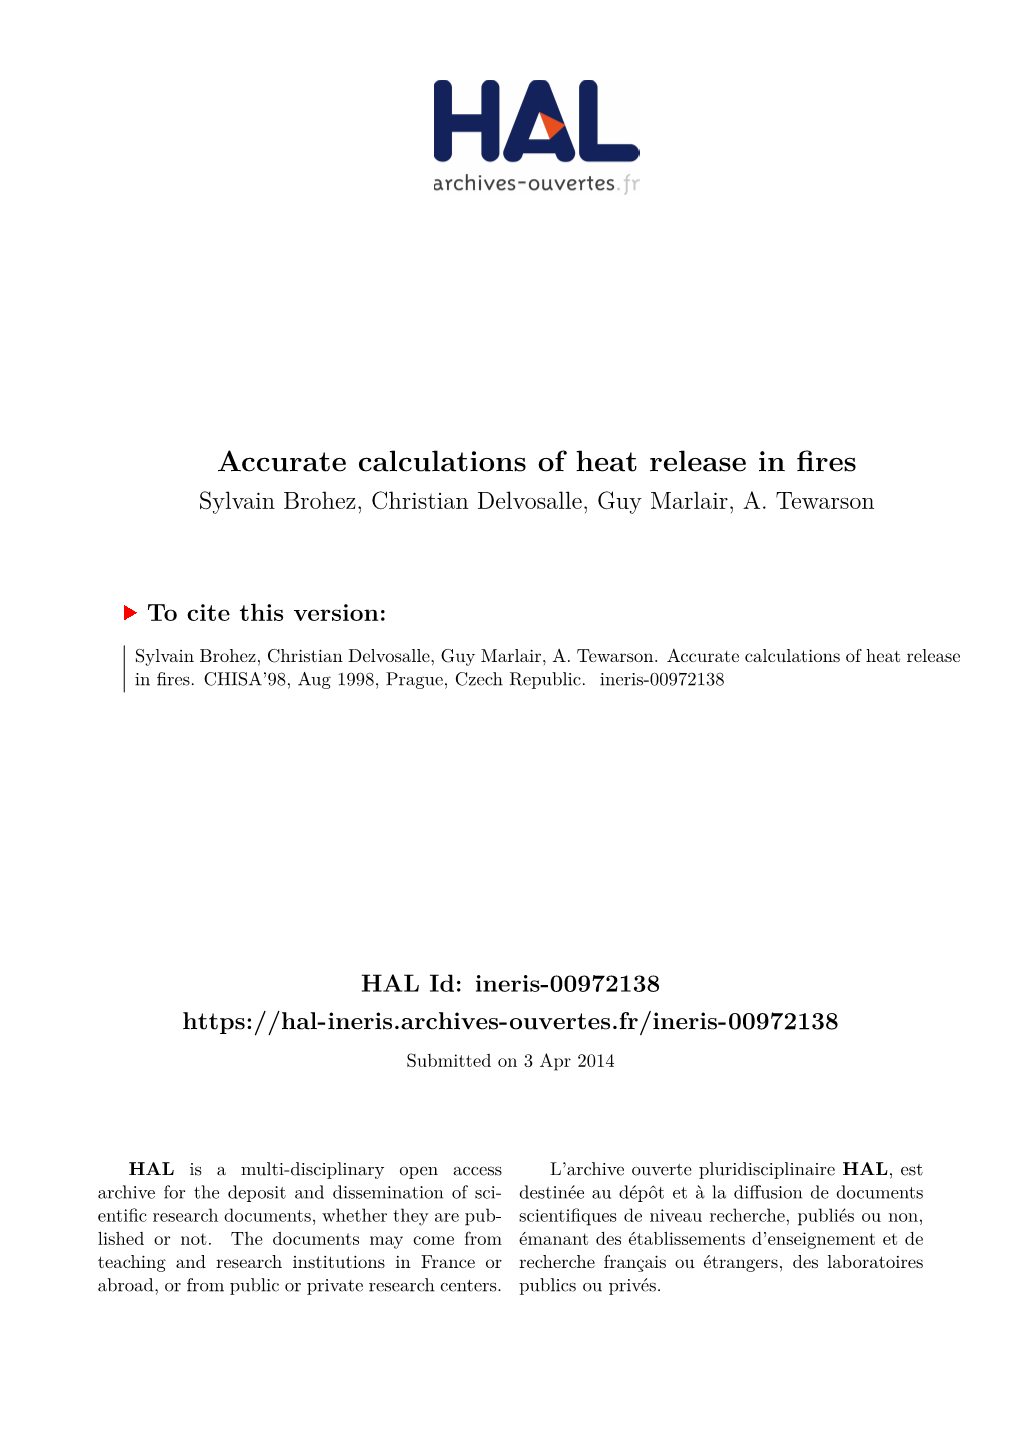 Accurate Calculations of Heat Release in Fires Sylvain Brohez, Christian Delvosalle, Guy Marlair, A